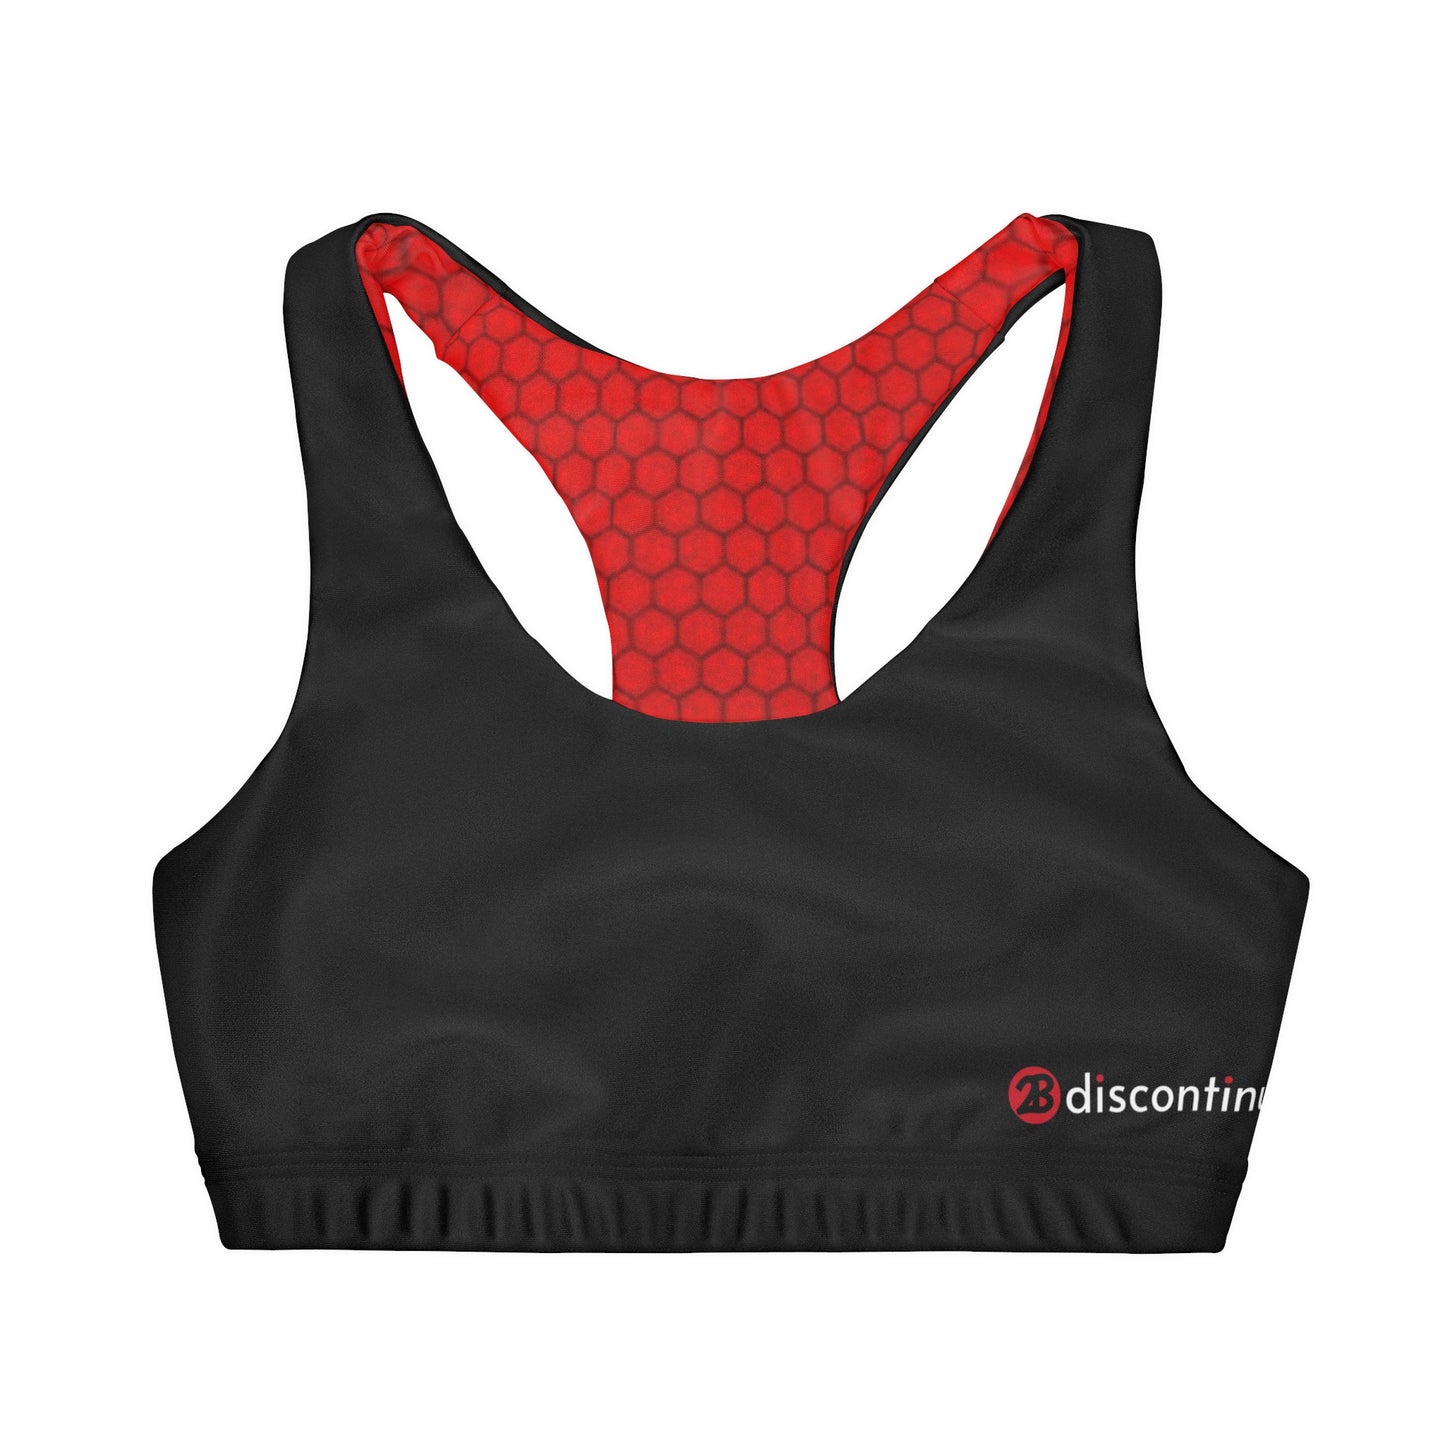 2Bdiscontinued. girls' double lined seamless sports bra blkred